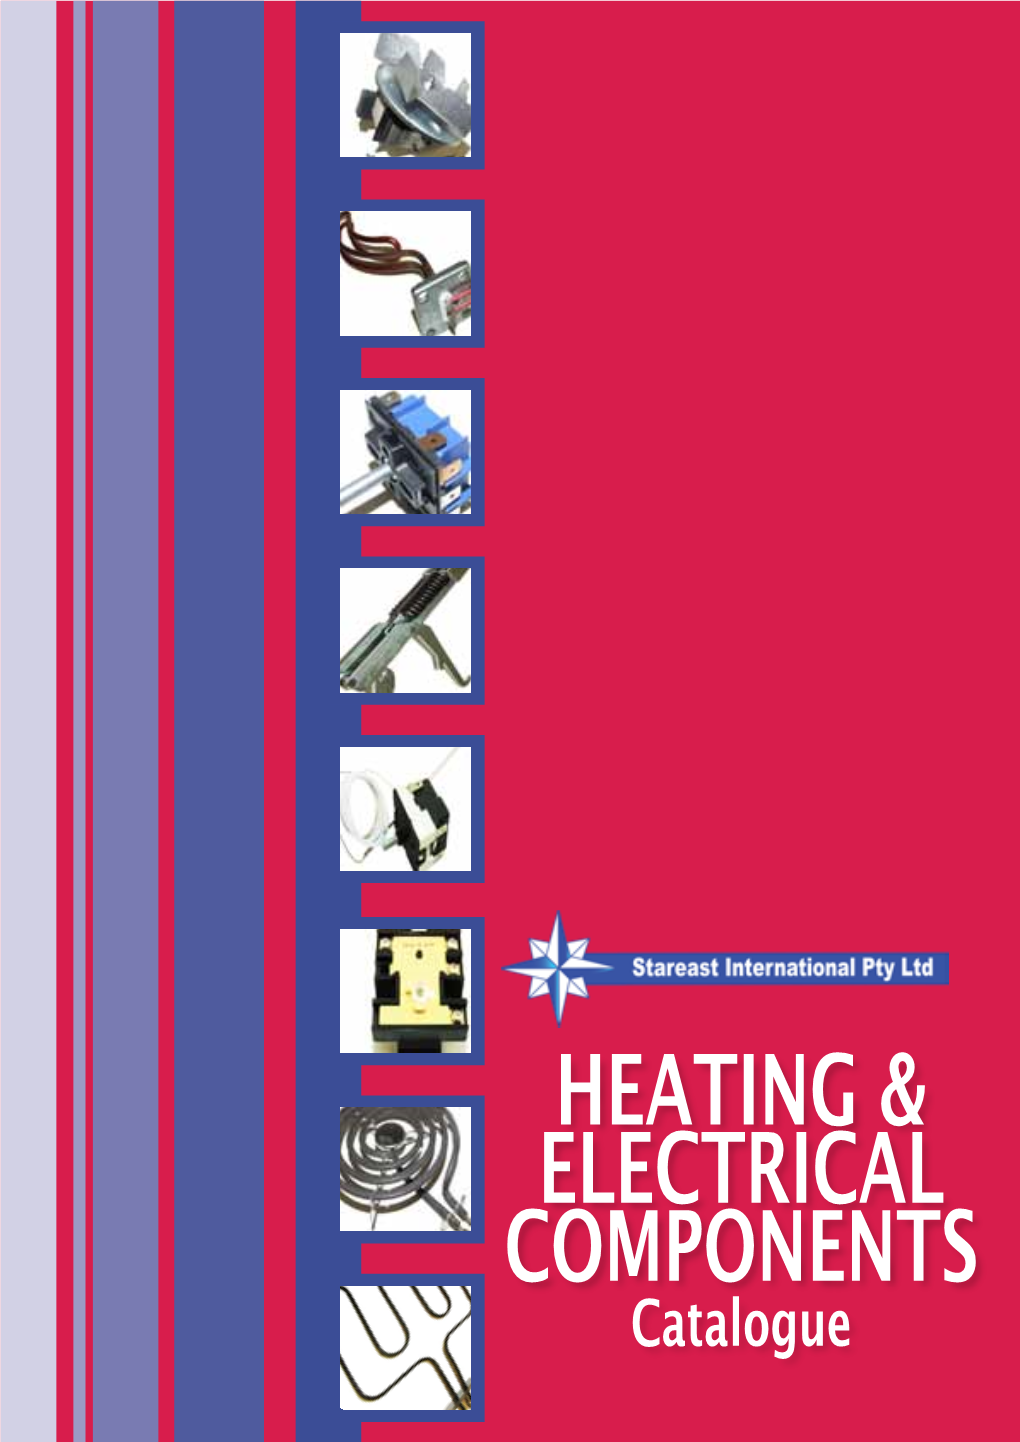 Heating & Electrical Components